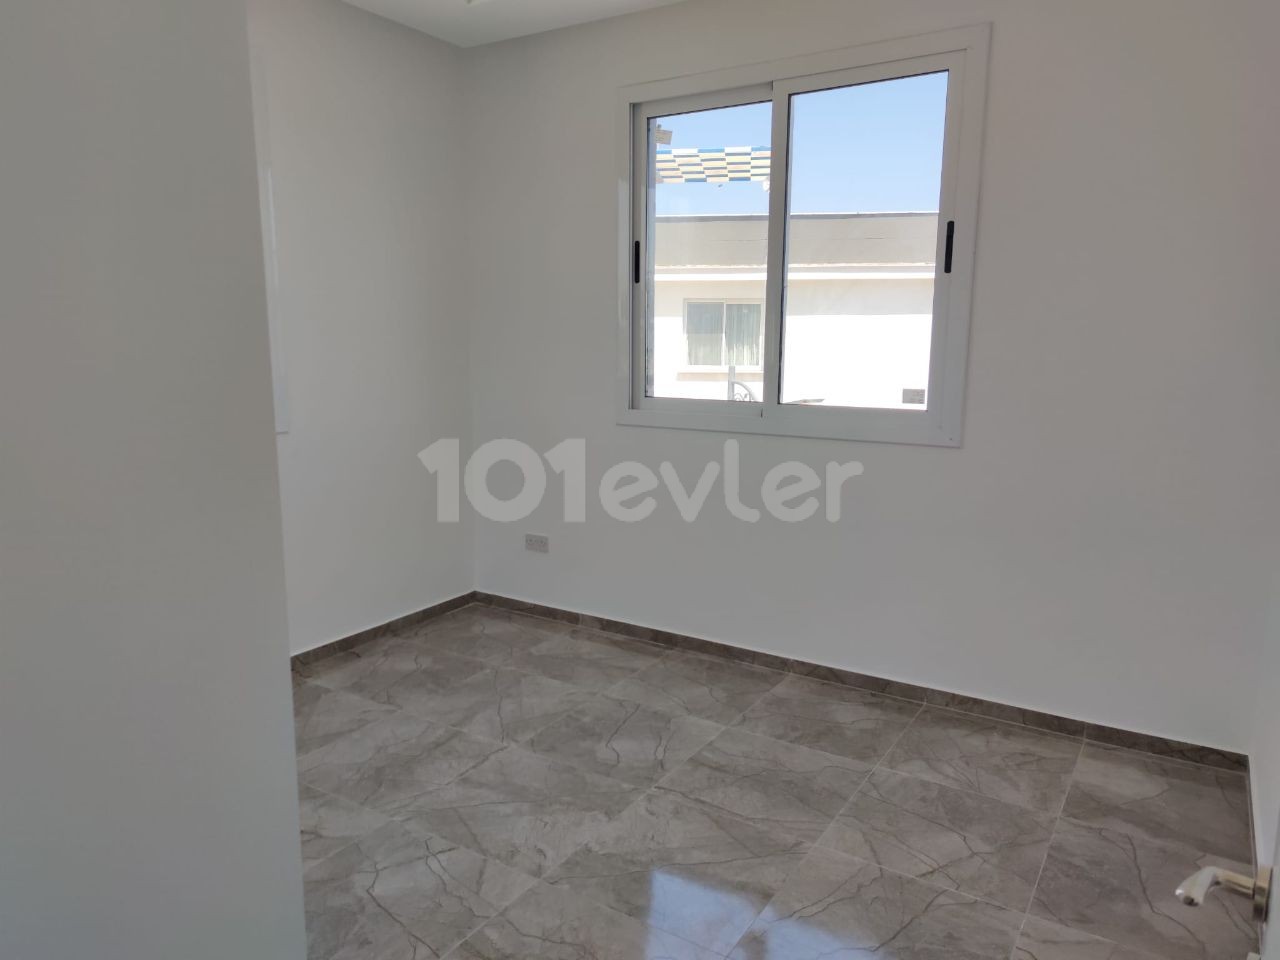 New 3+1 Flat With Sea View Terrace Within Walking Distance To The Sea For Rent In Karşıyaka